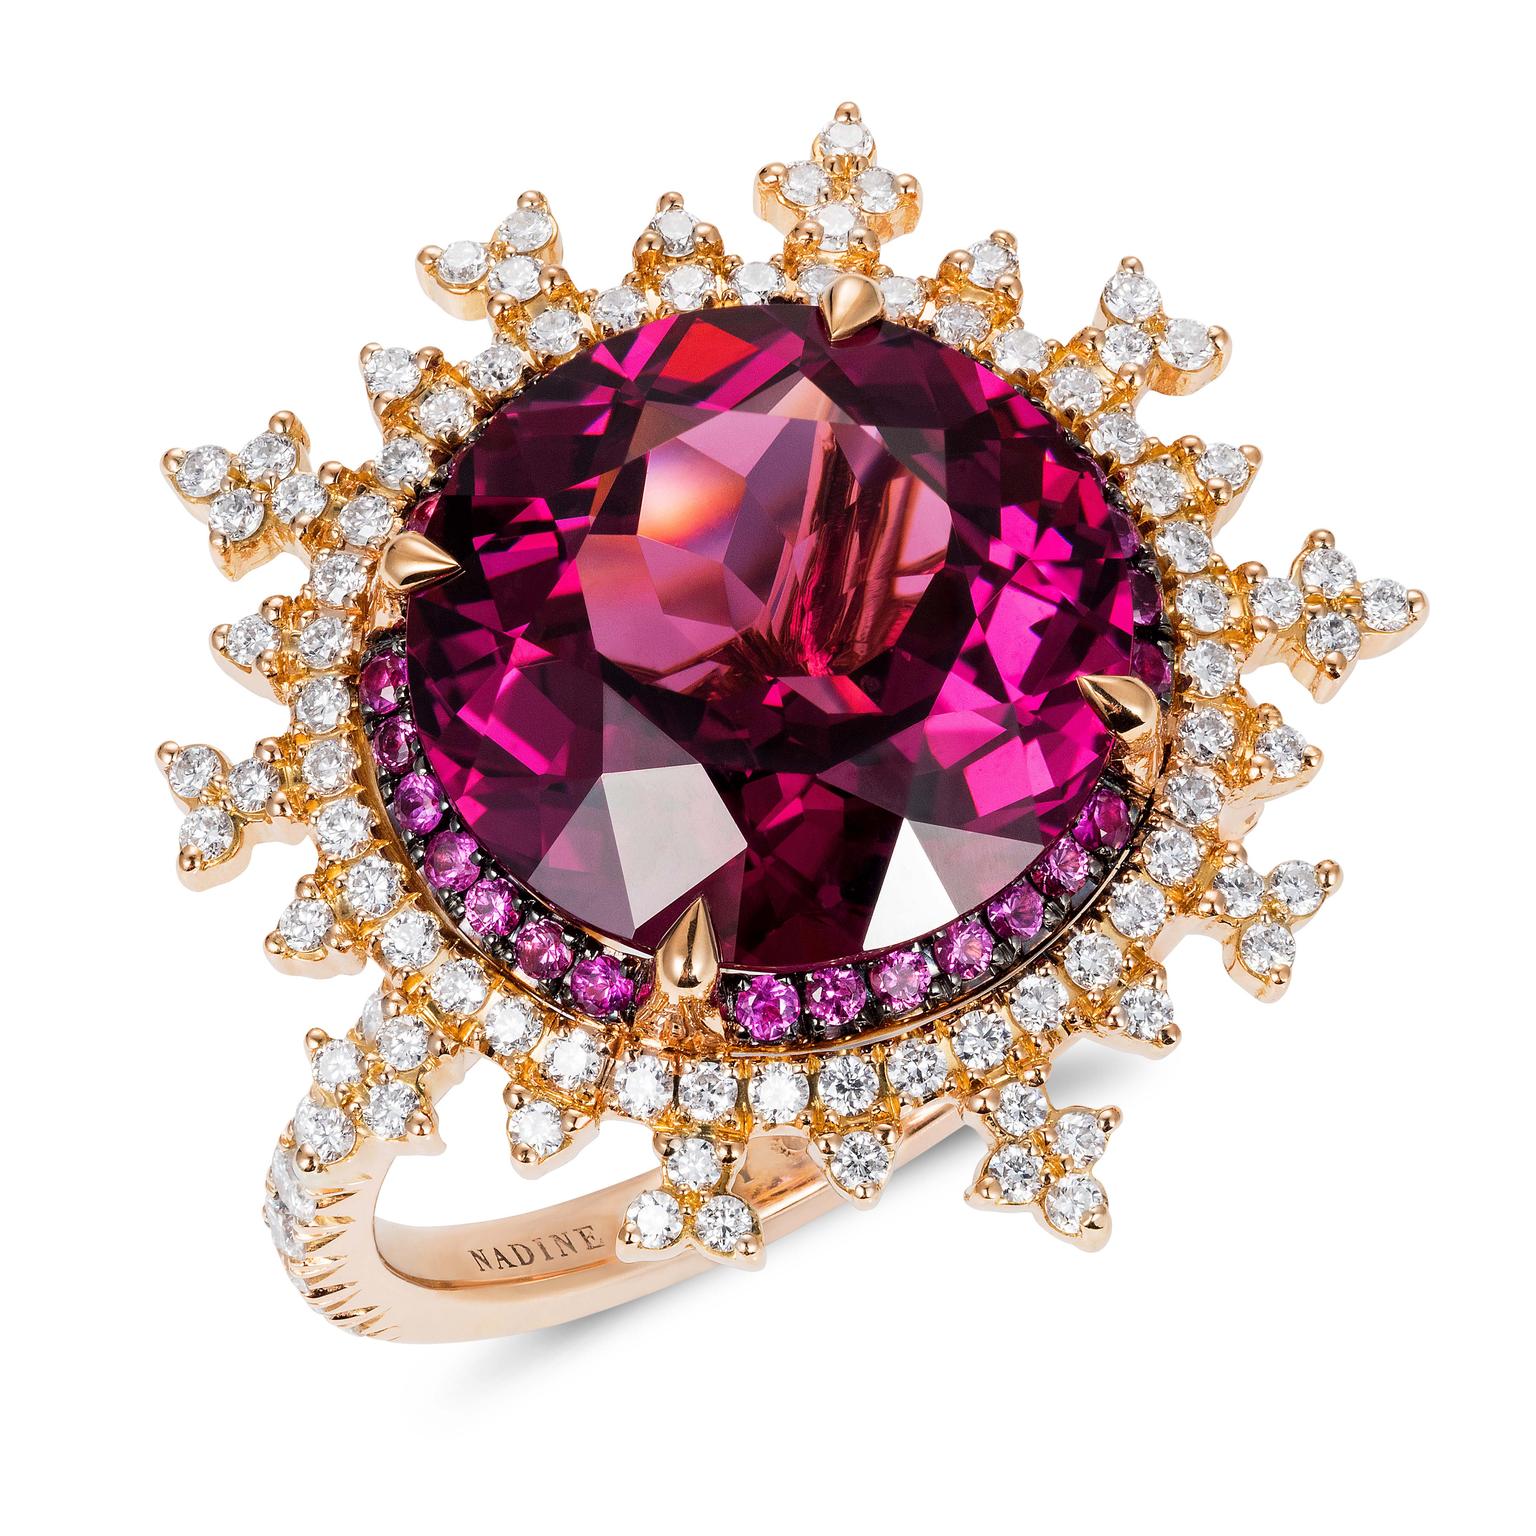 Engagement ring with rhodolite and diamonds from Nadine Aysoy